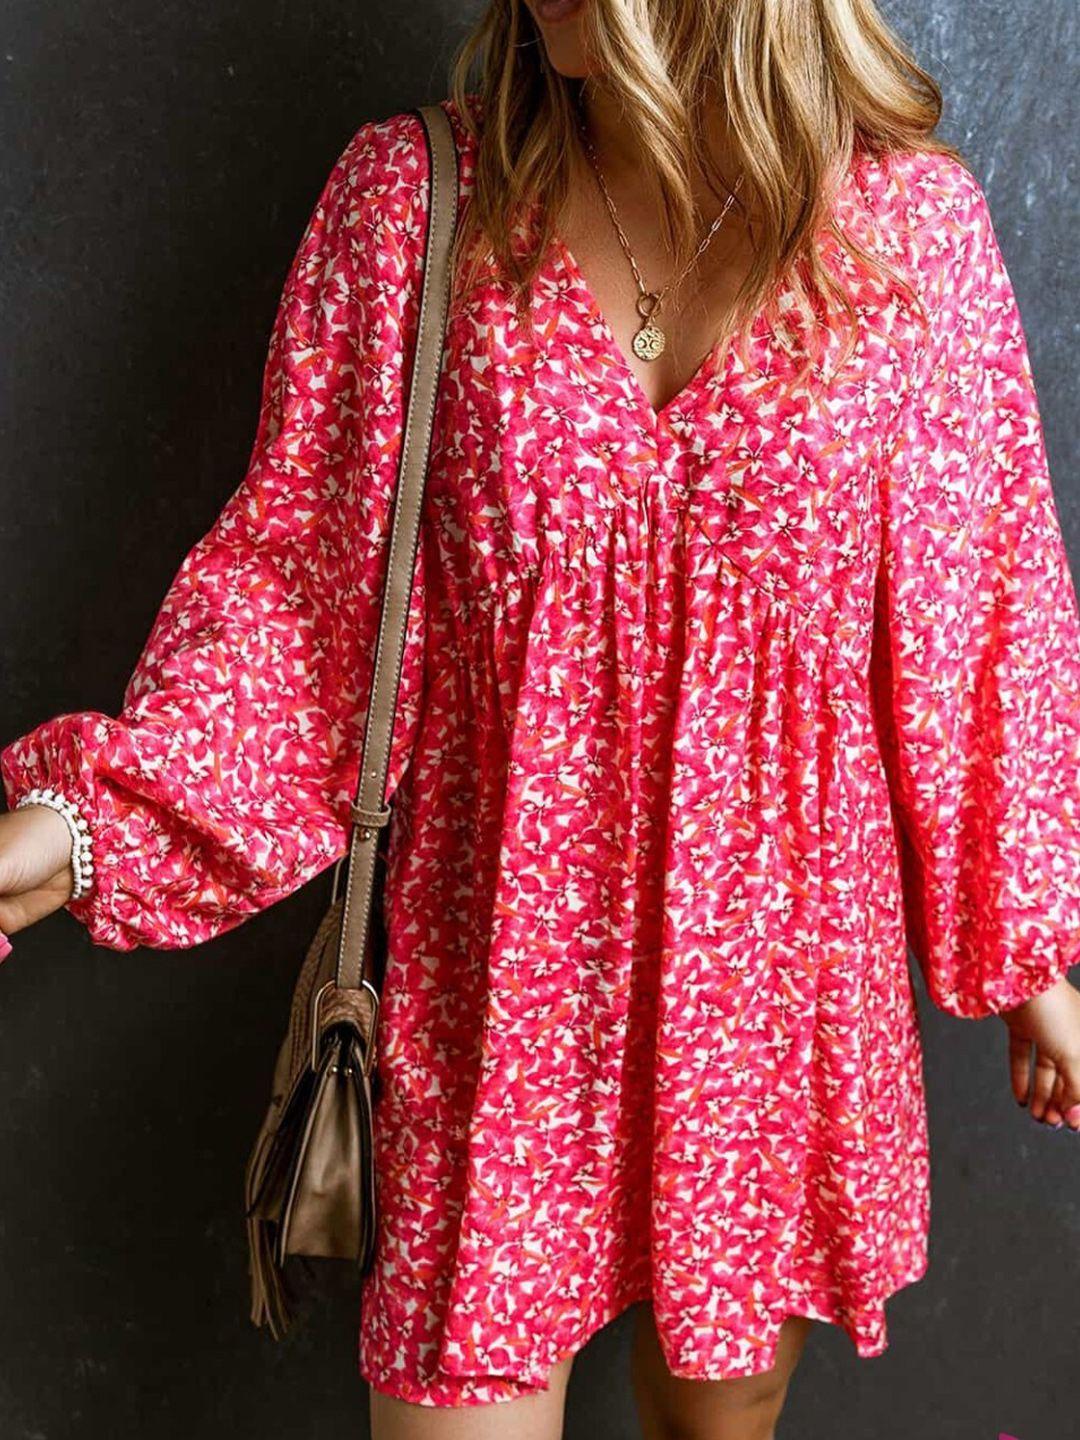 stylecast rose floral printed v-neck puff sleeve gathered empire dress